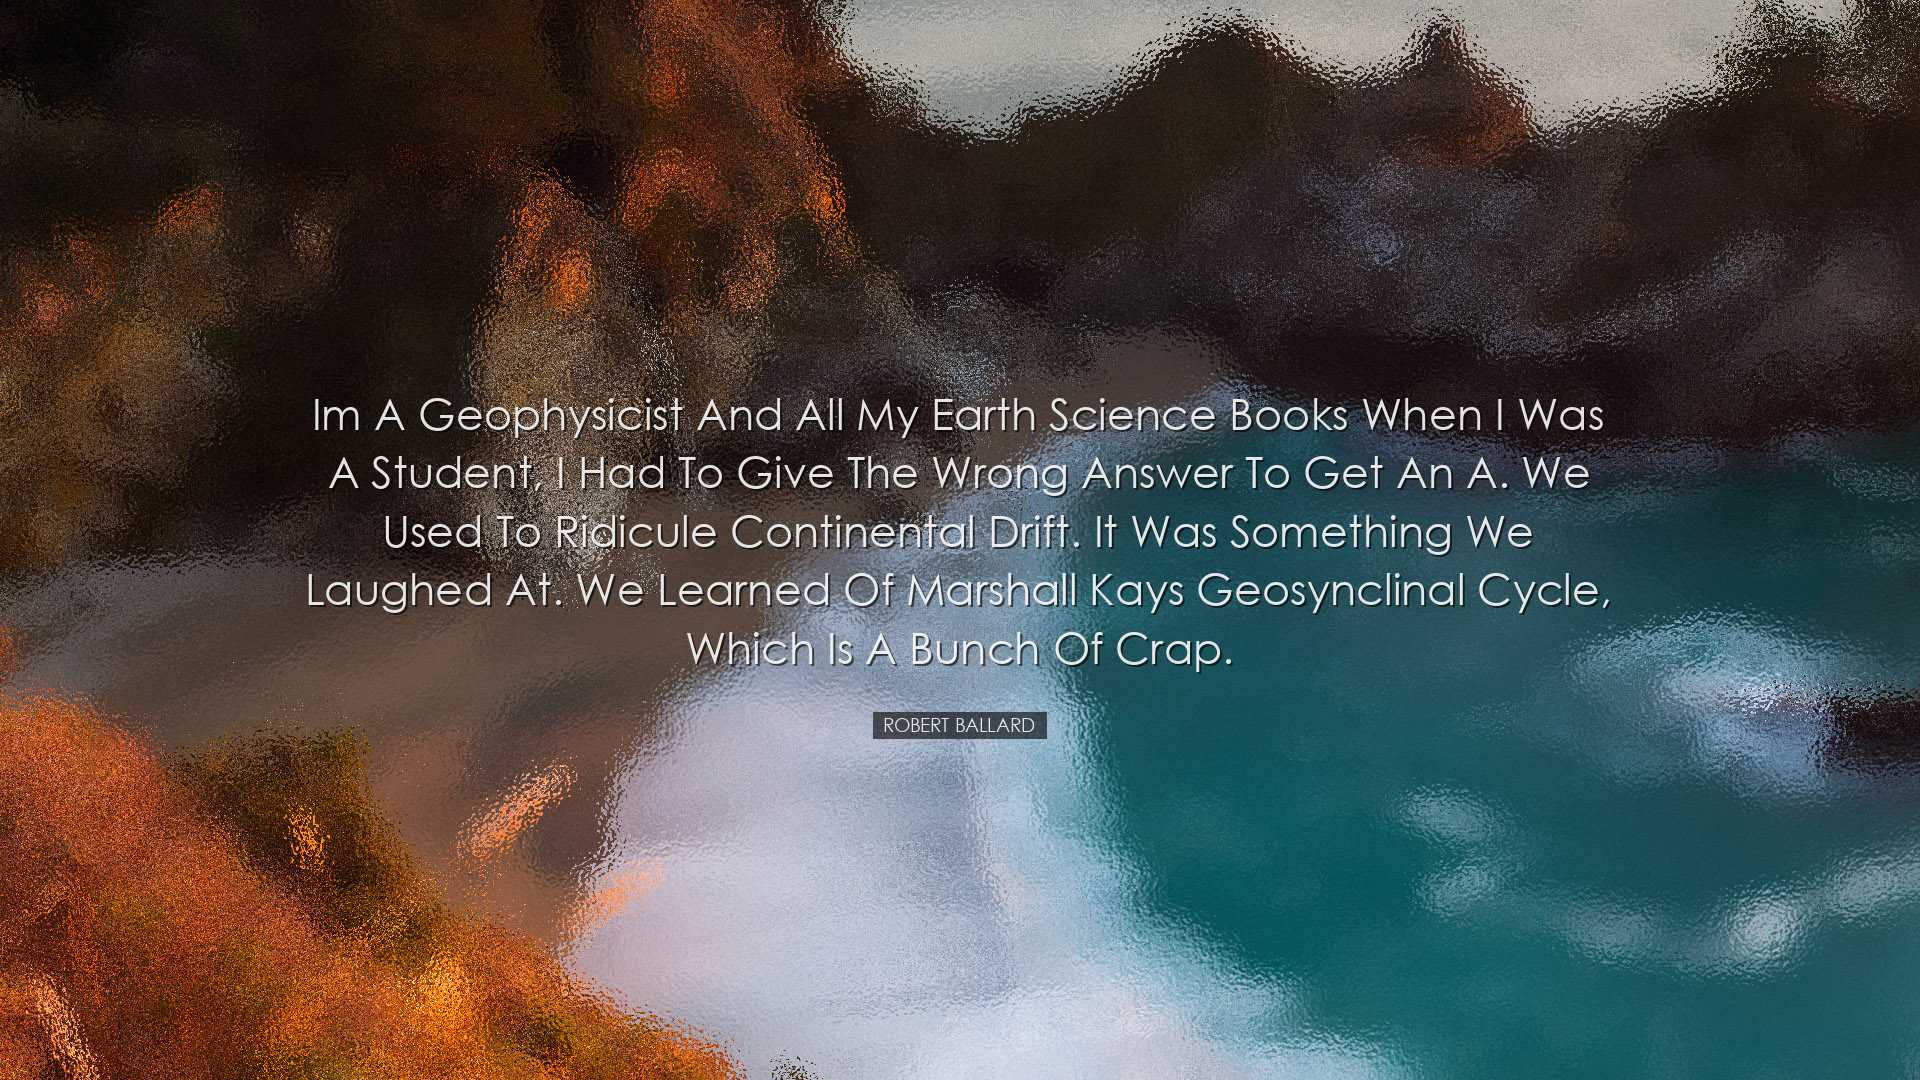 Im a geophysicist and all my earth science books when I was a stud